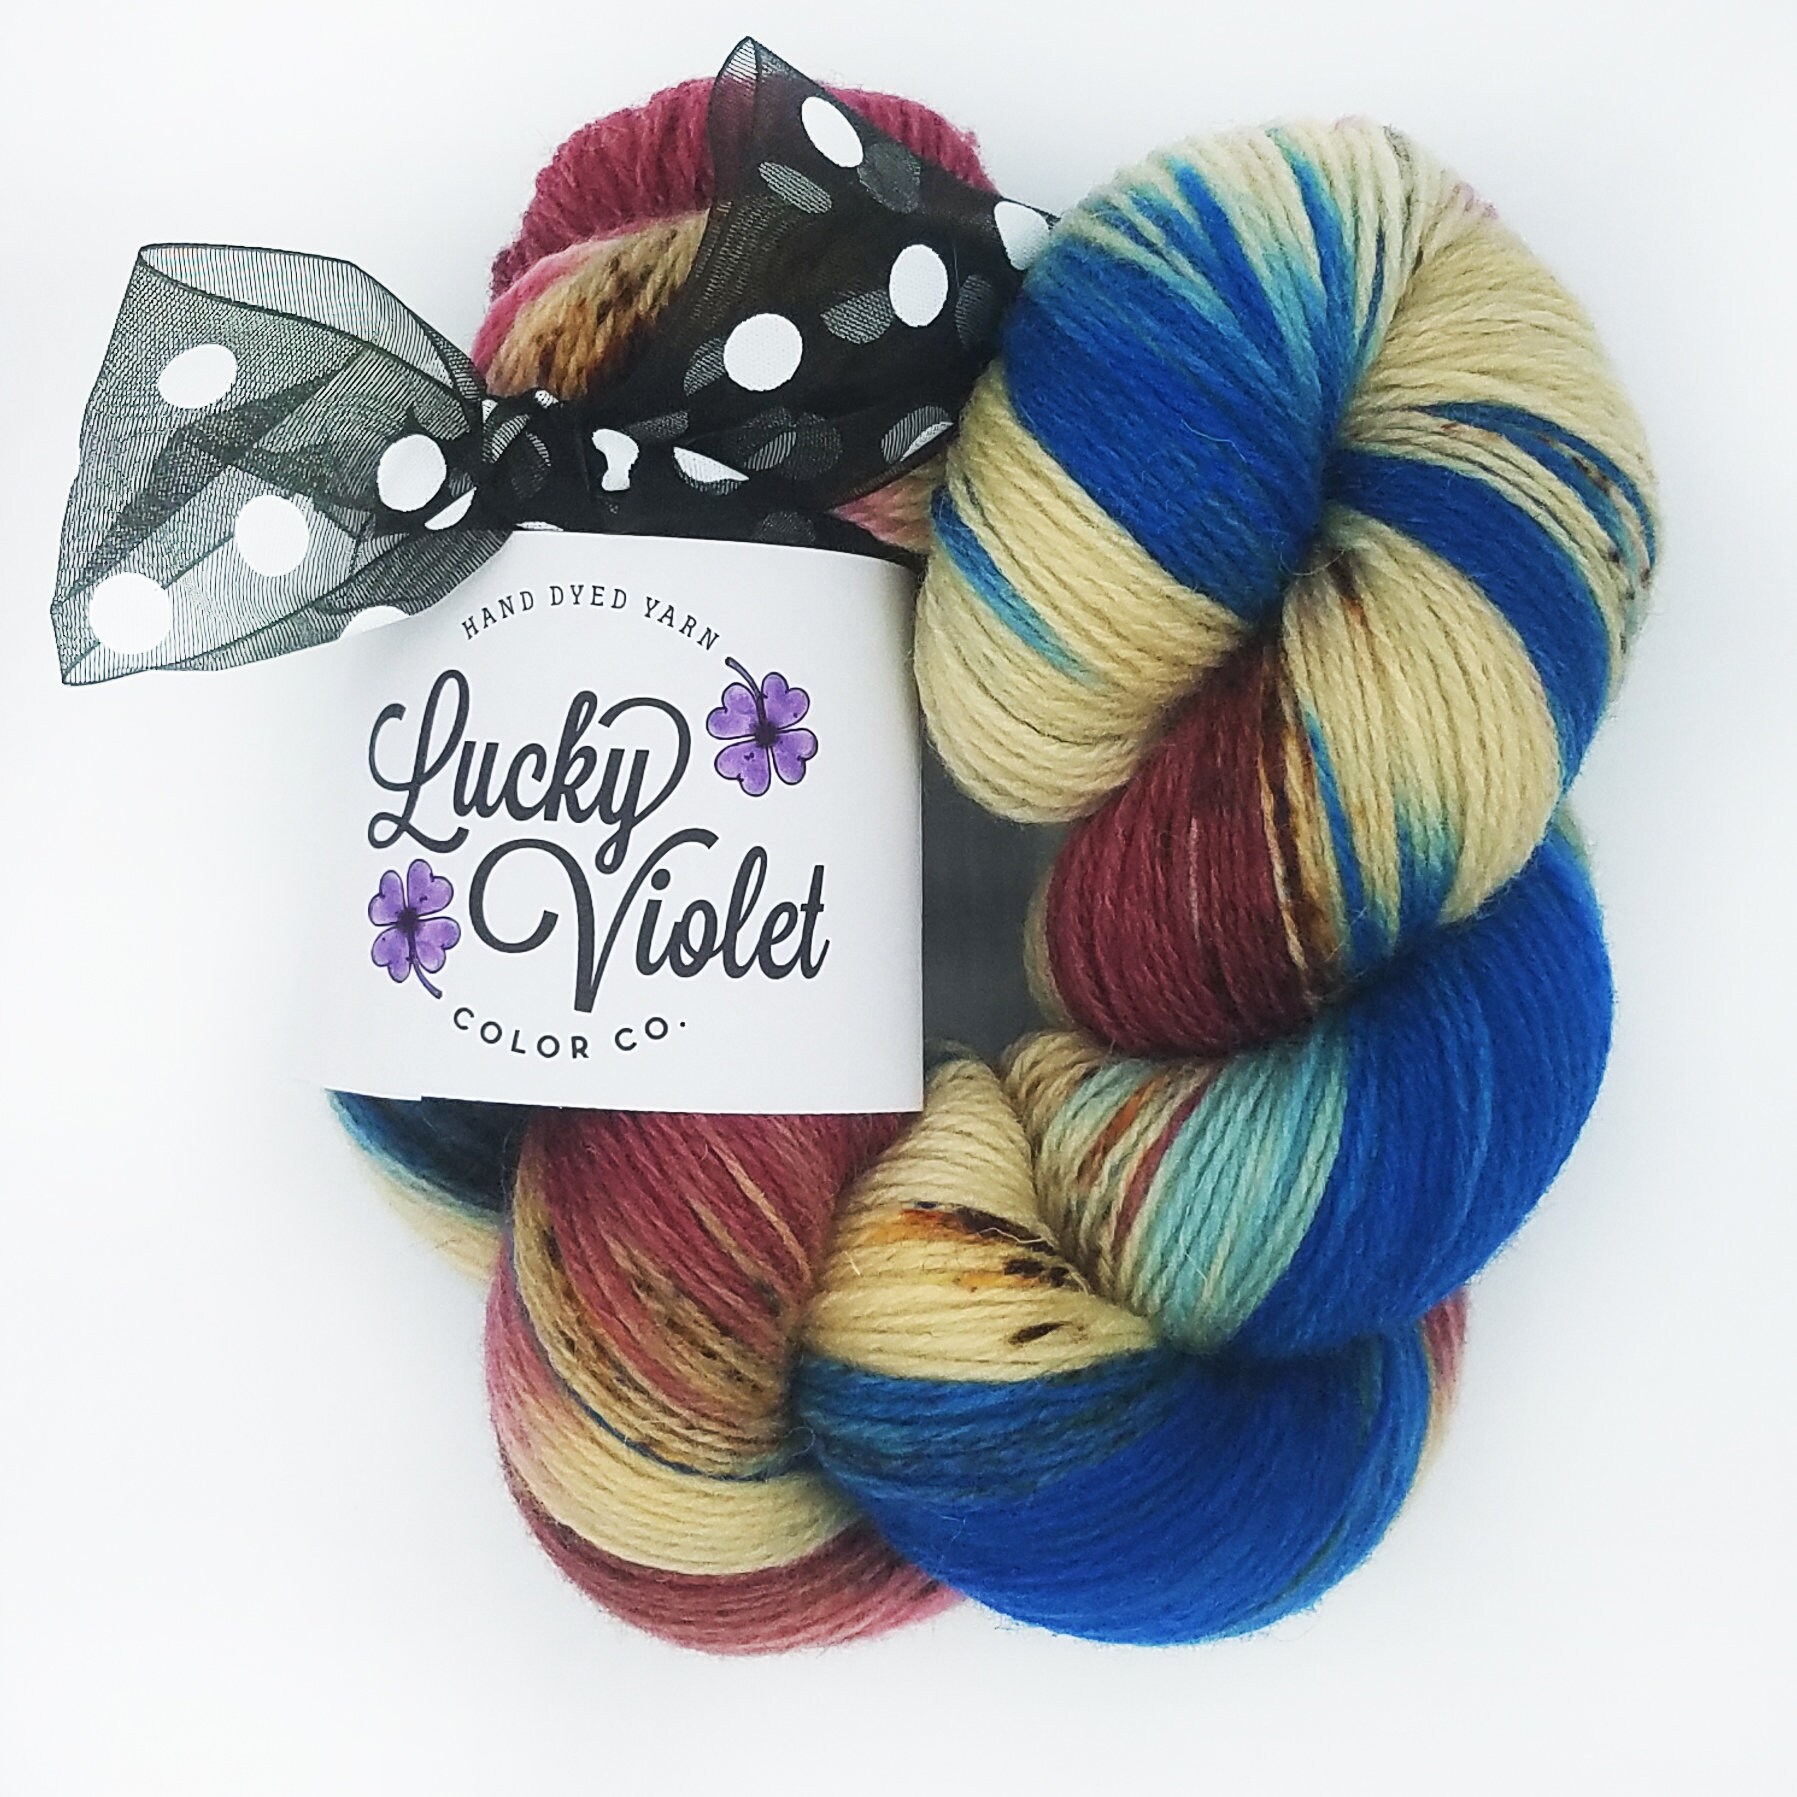 Painted Indie Sock Yarn from Lucky Violet Color Co OOAK #2-004 Hand Dyed